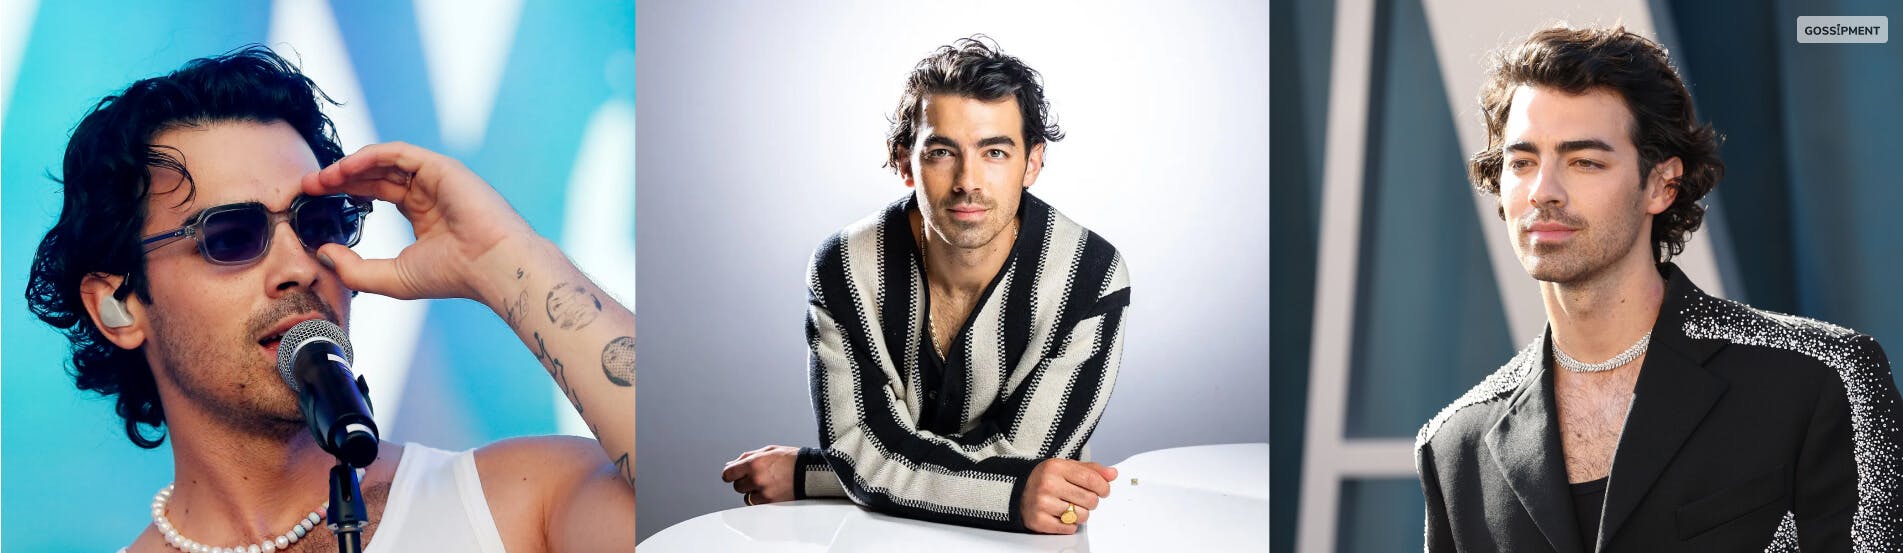 Cover Image for Joe Jonas Opens Up About Using Injectables: Talks About His “Aesthetic Treatment”